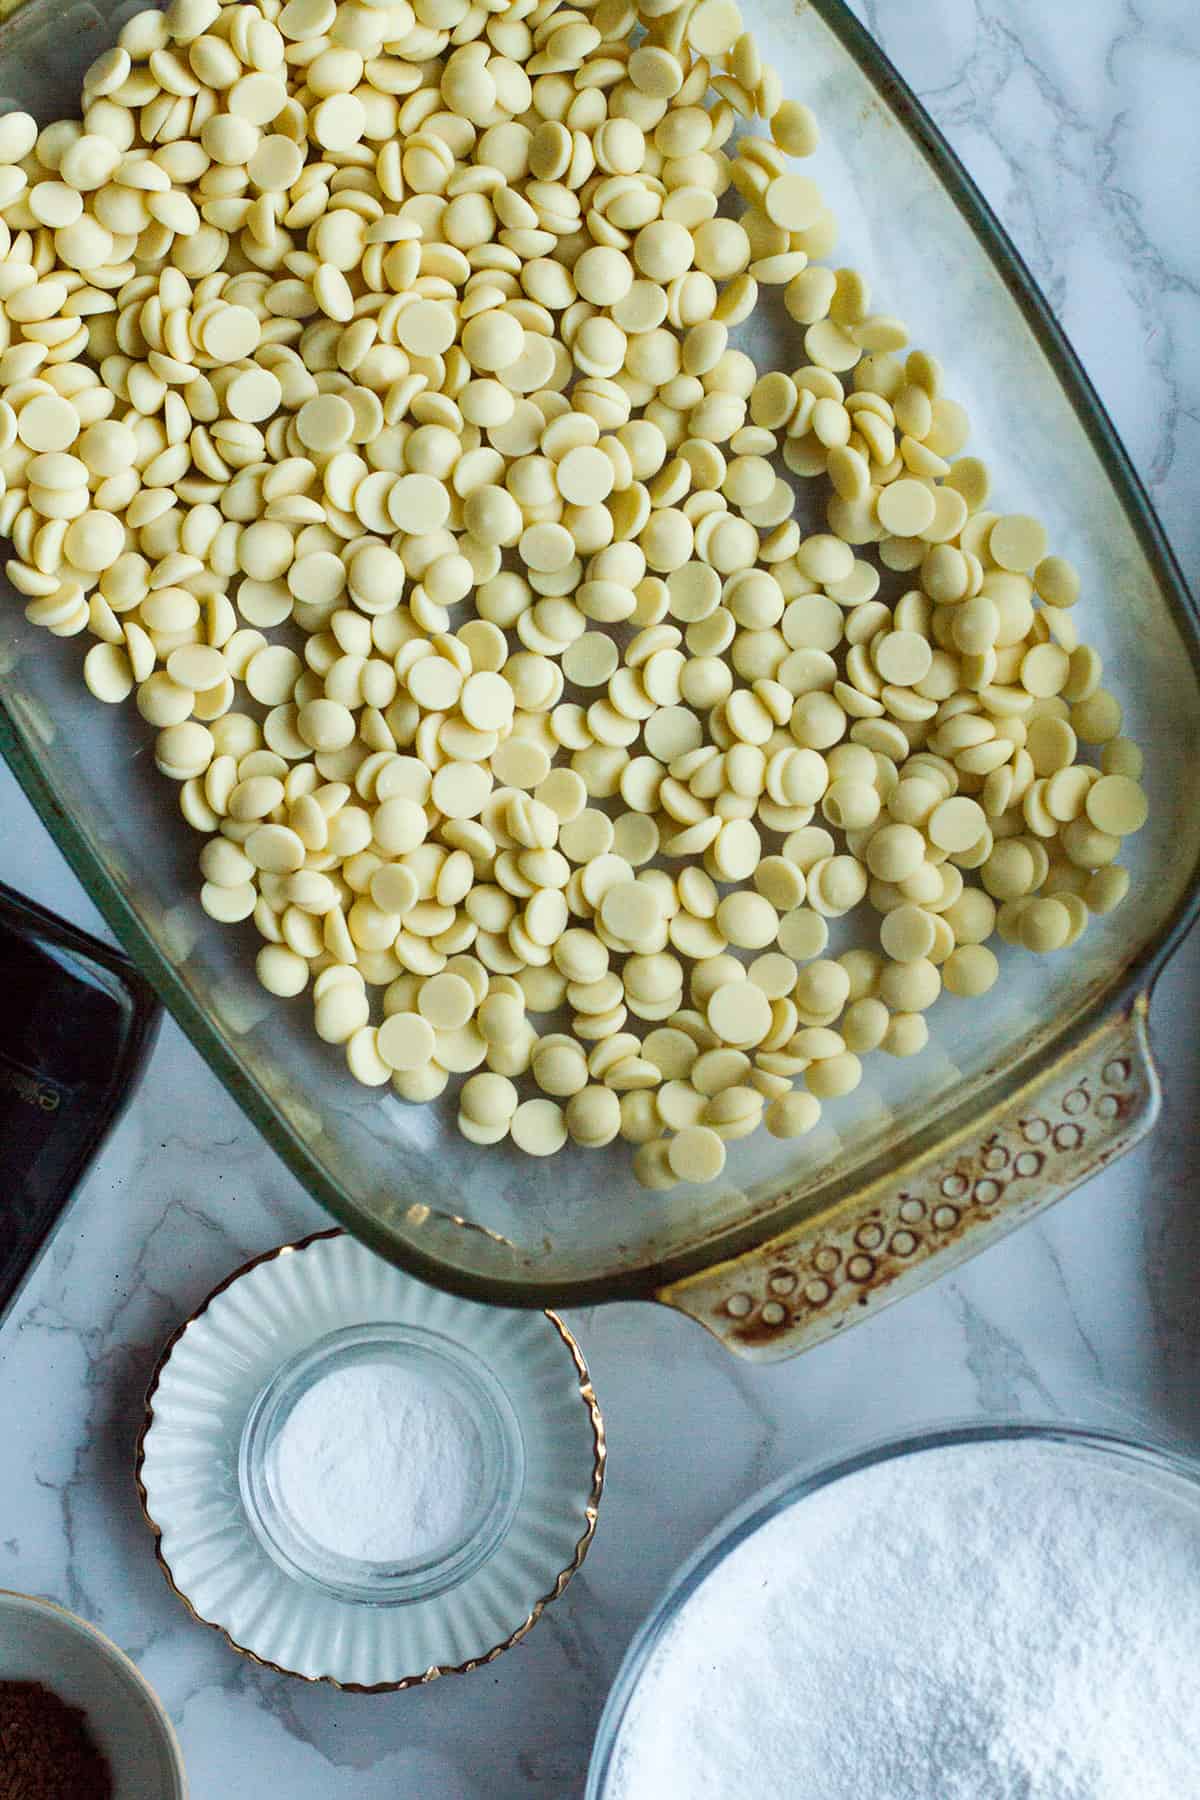 White chocolate chips in a glass pan.